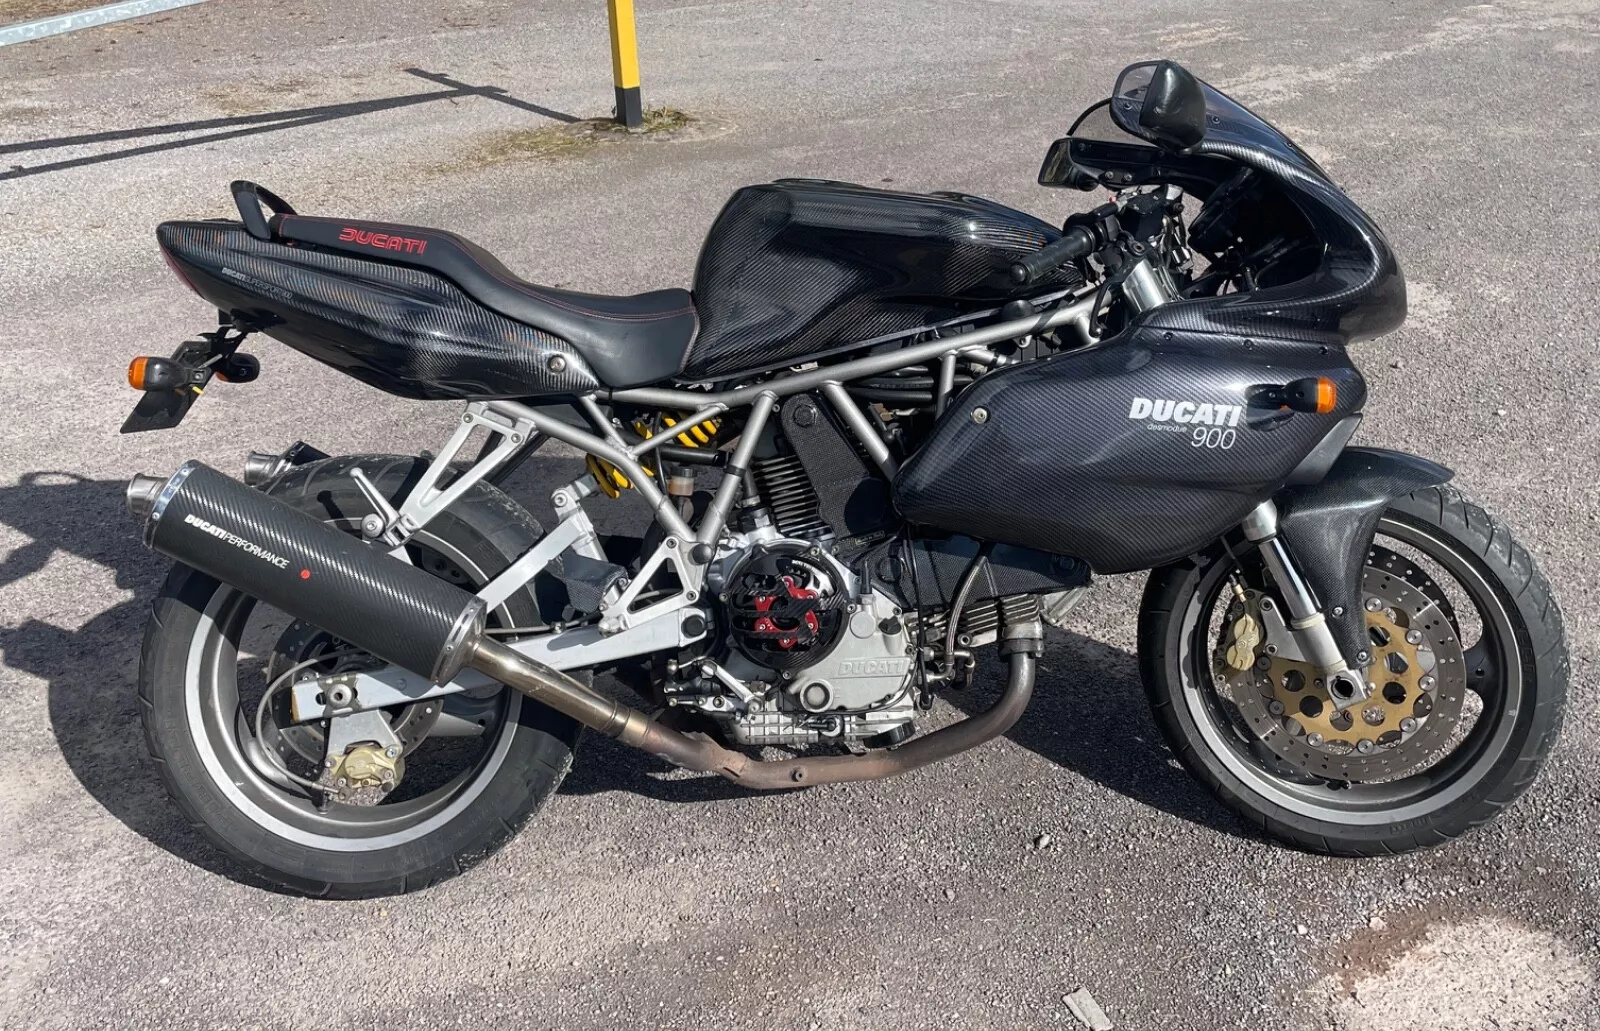 Ducati 900 SS . Stunning Carbon Edition - Picture 1 of 24